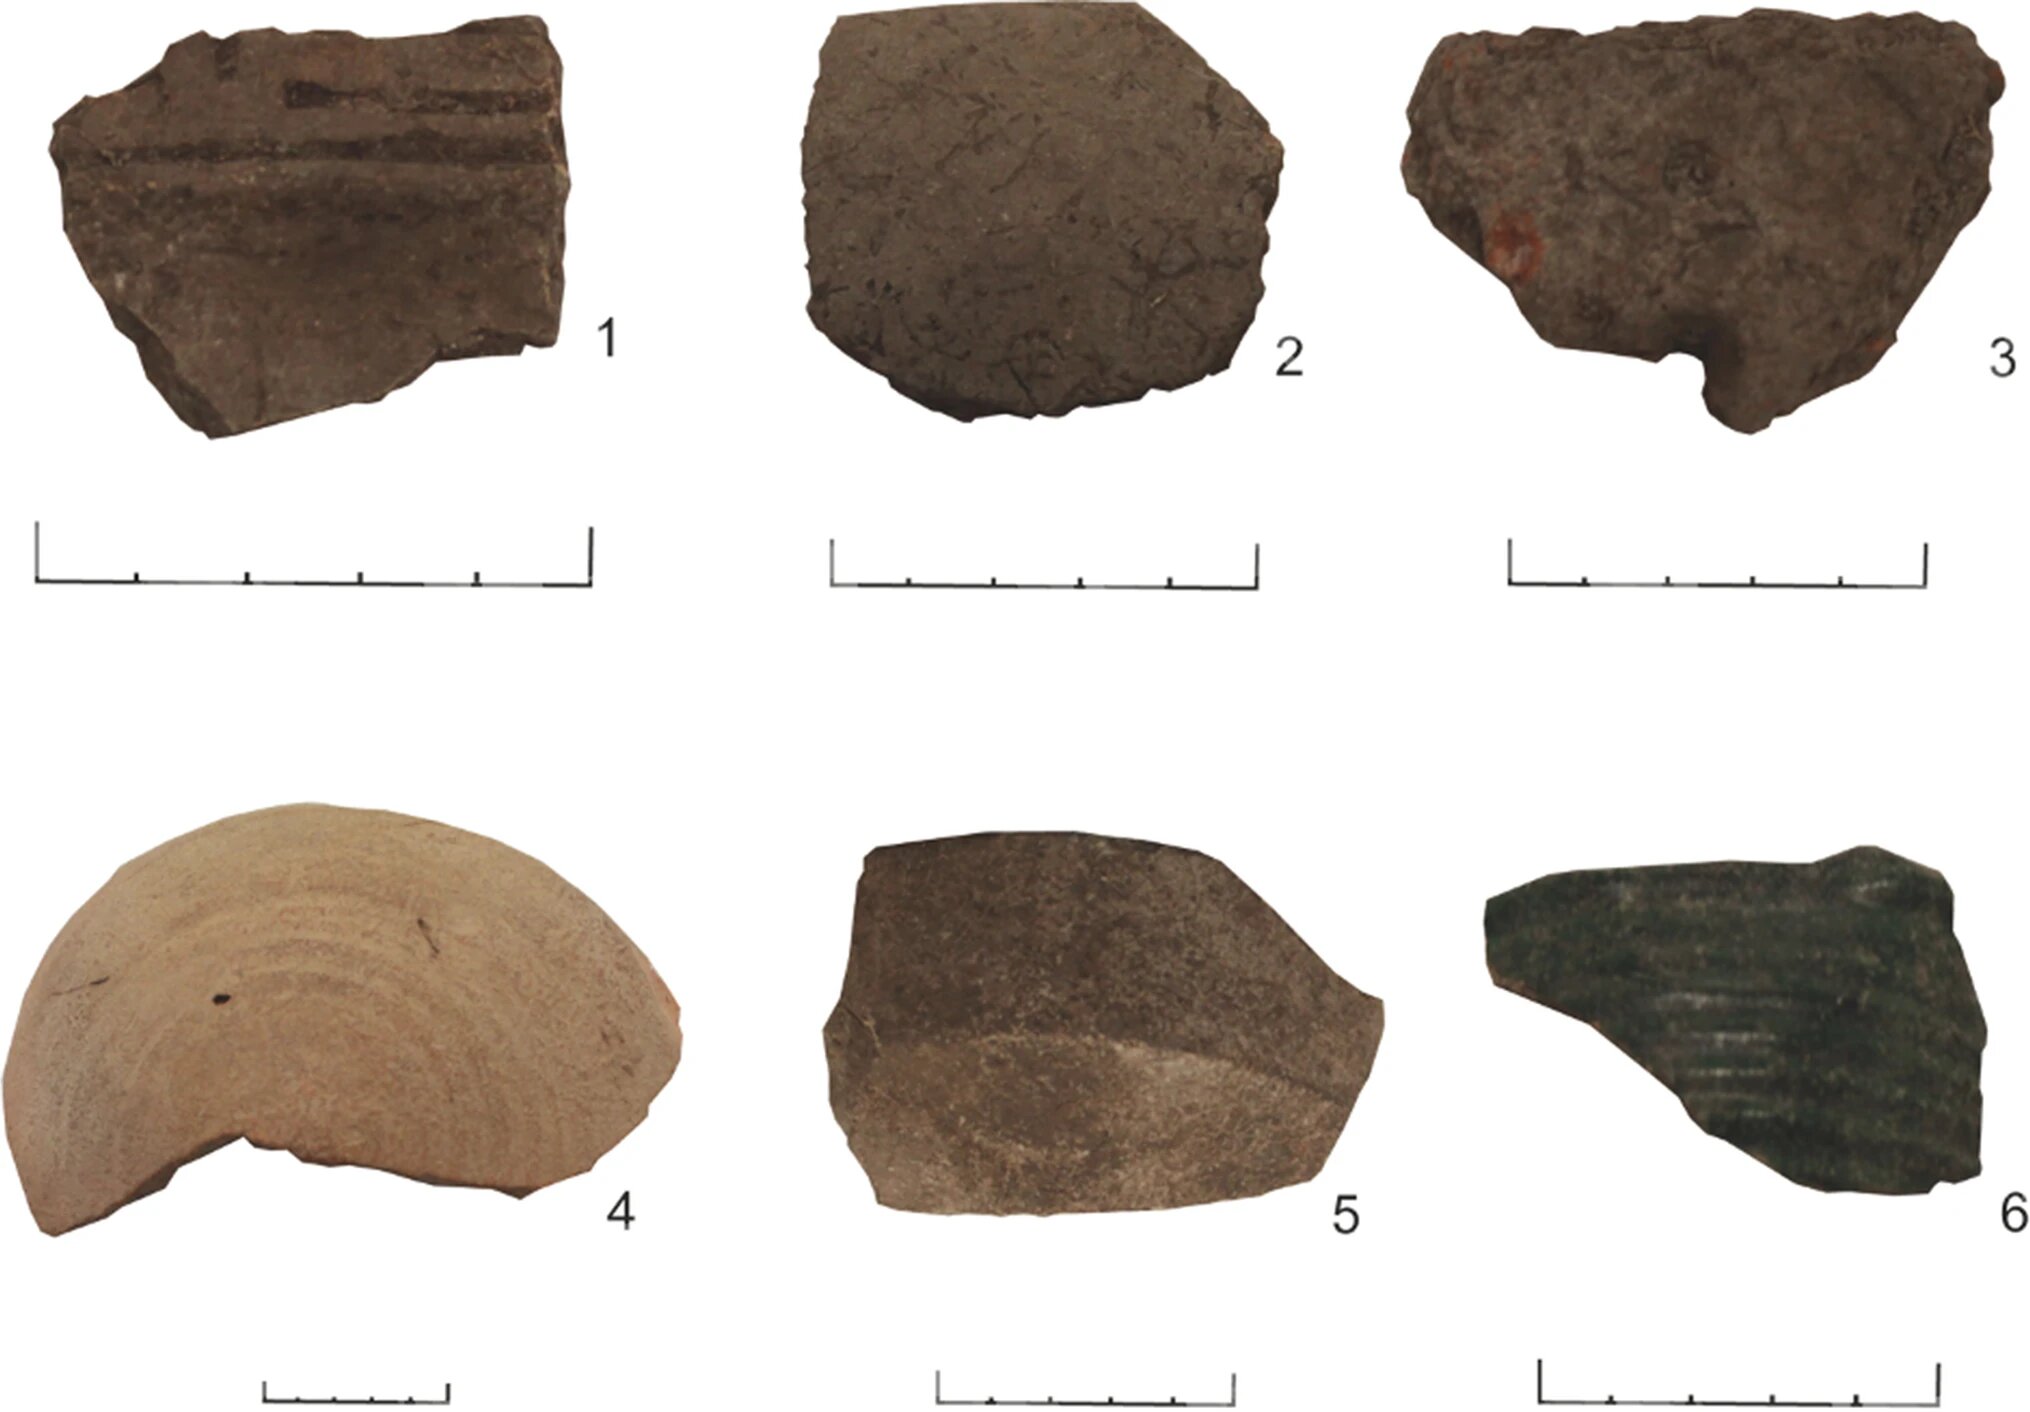 Ceramic samples from the six categories of pottery analysed